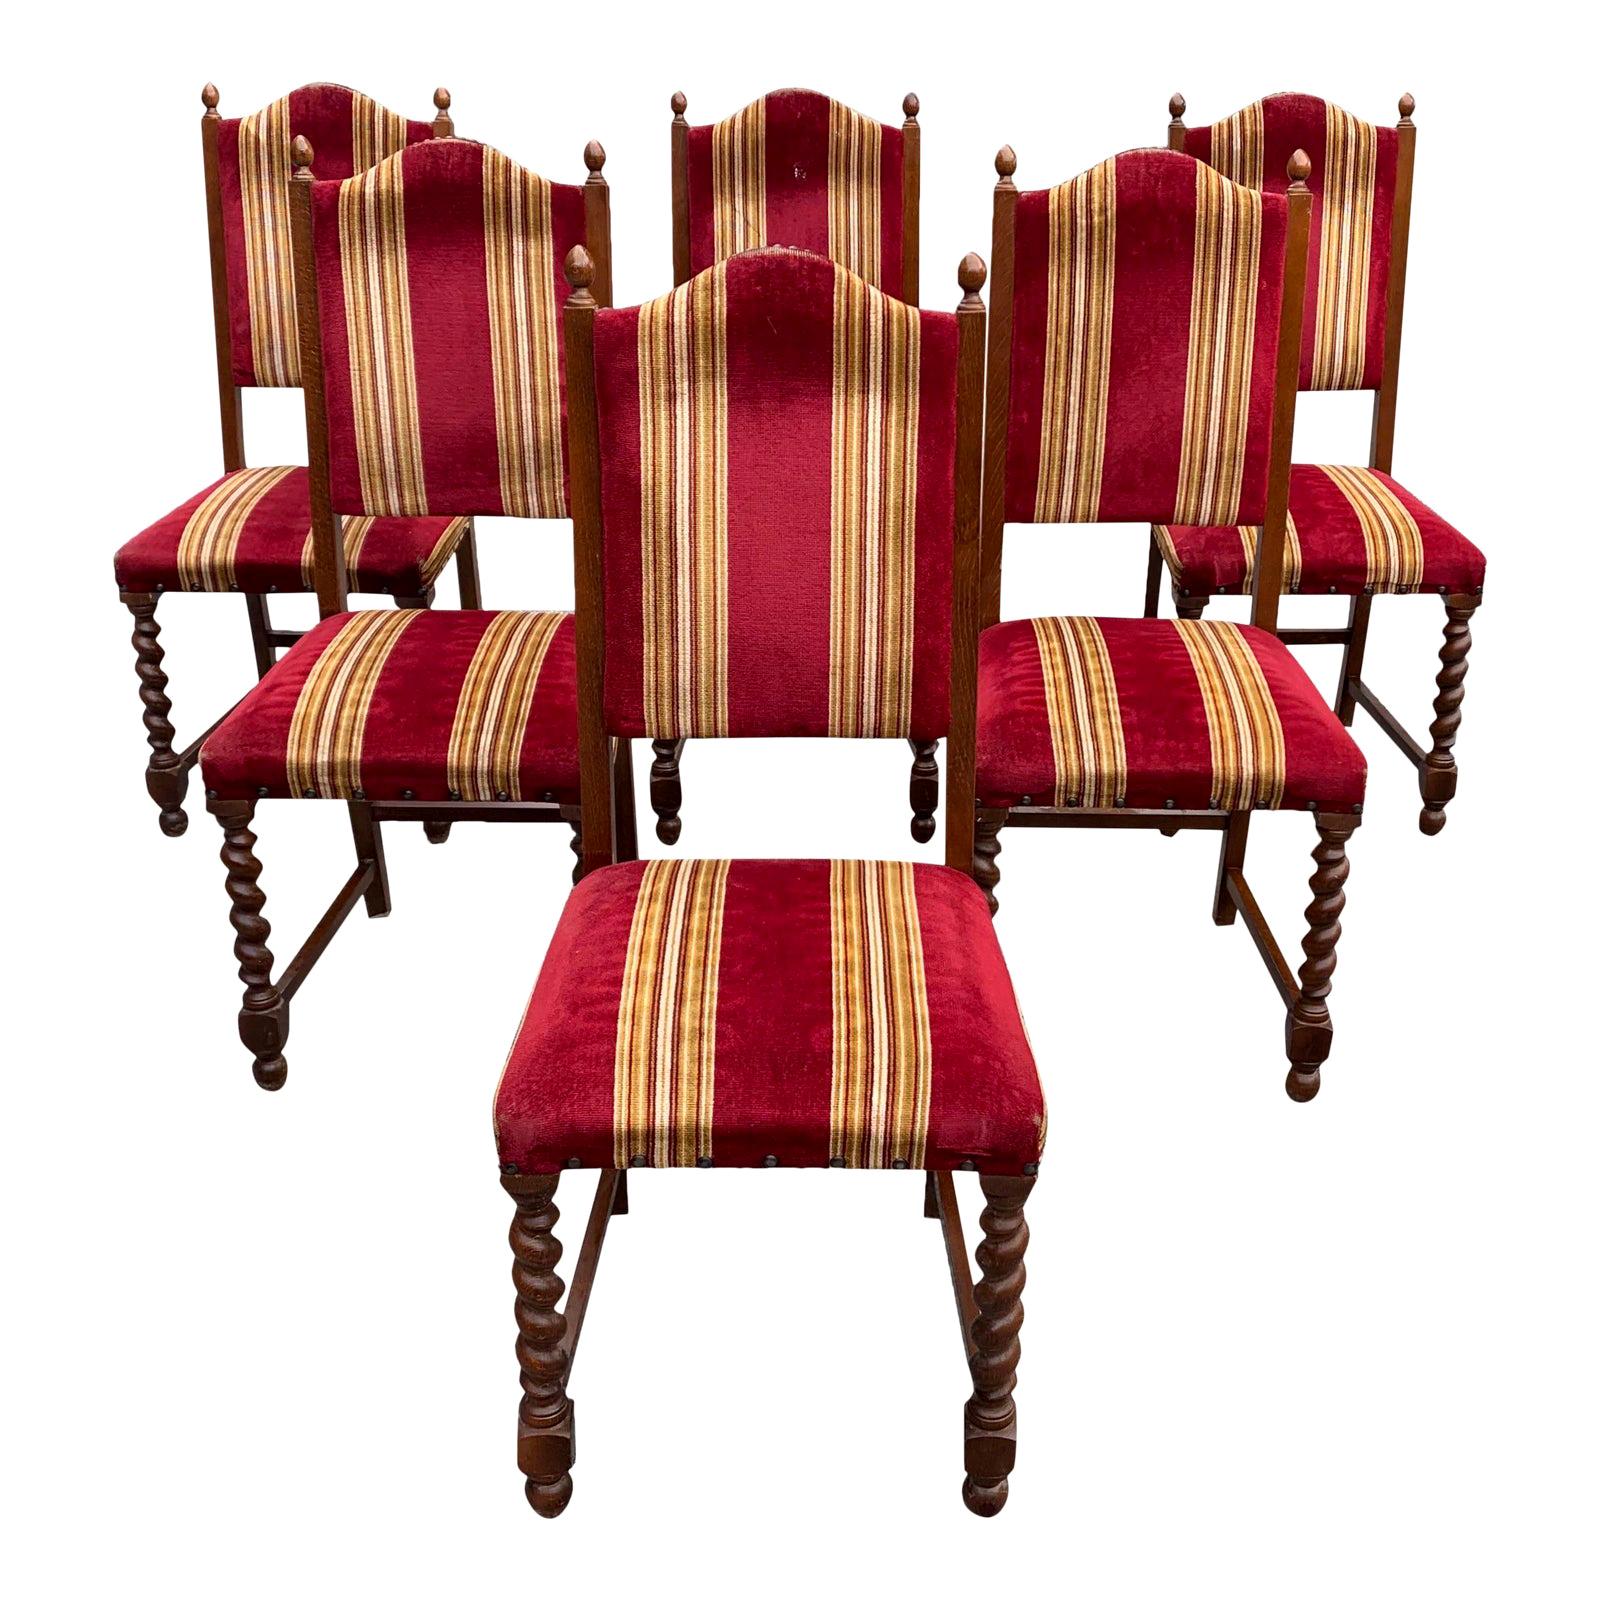 Set of 6 Vintage Louis XIII Style Barley Twist Solid Walnut Dining Chairs, 1880s For Sale